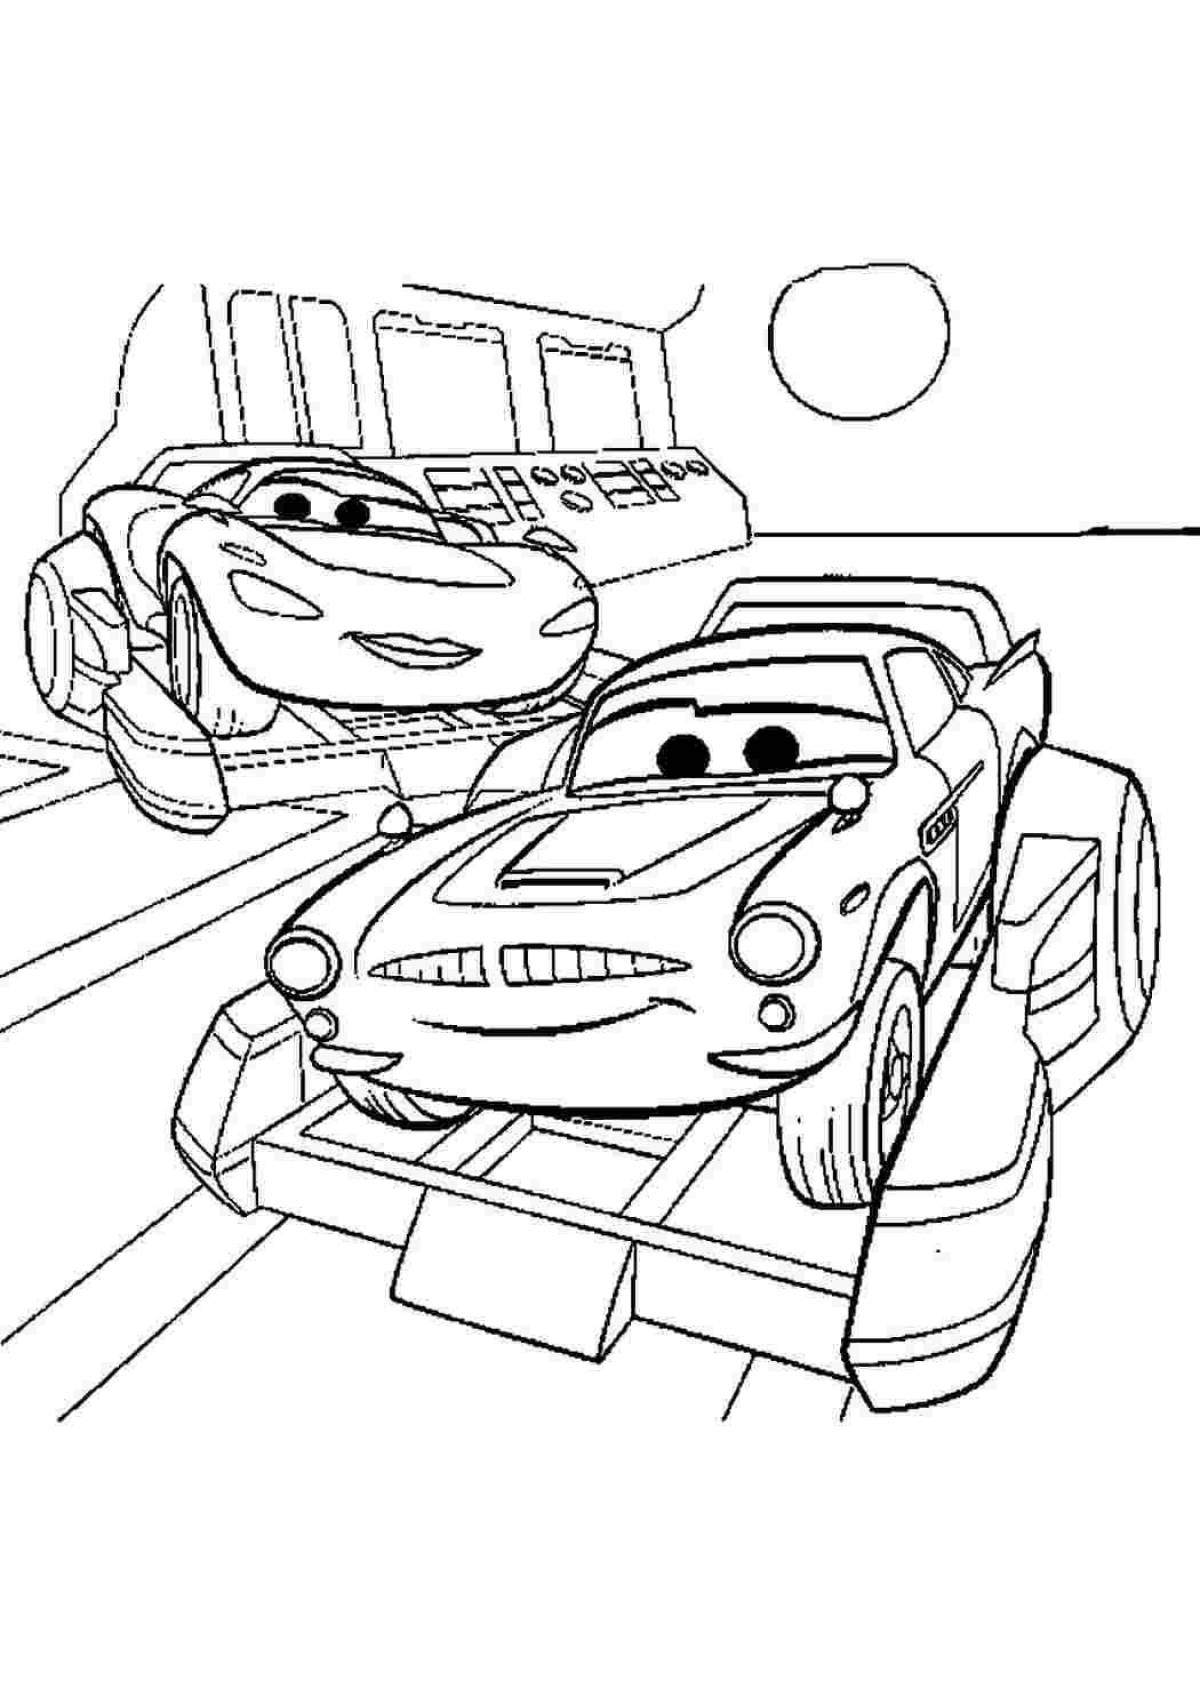 Sally's amazing cars coloring page